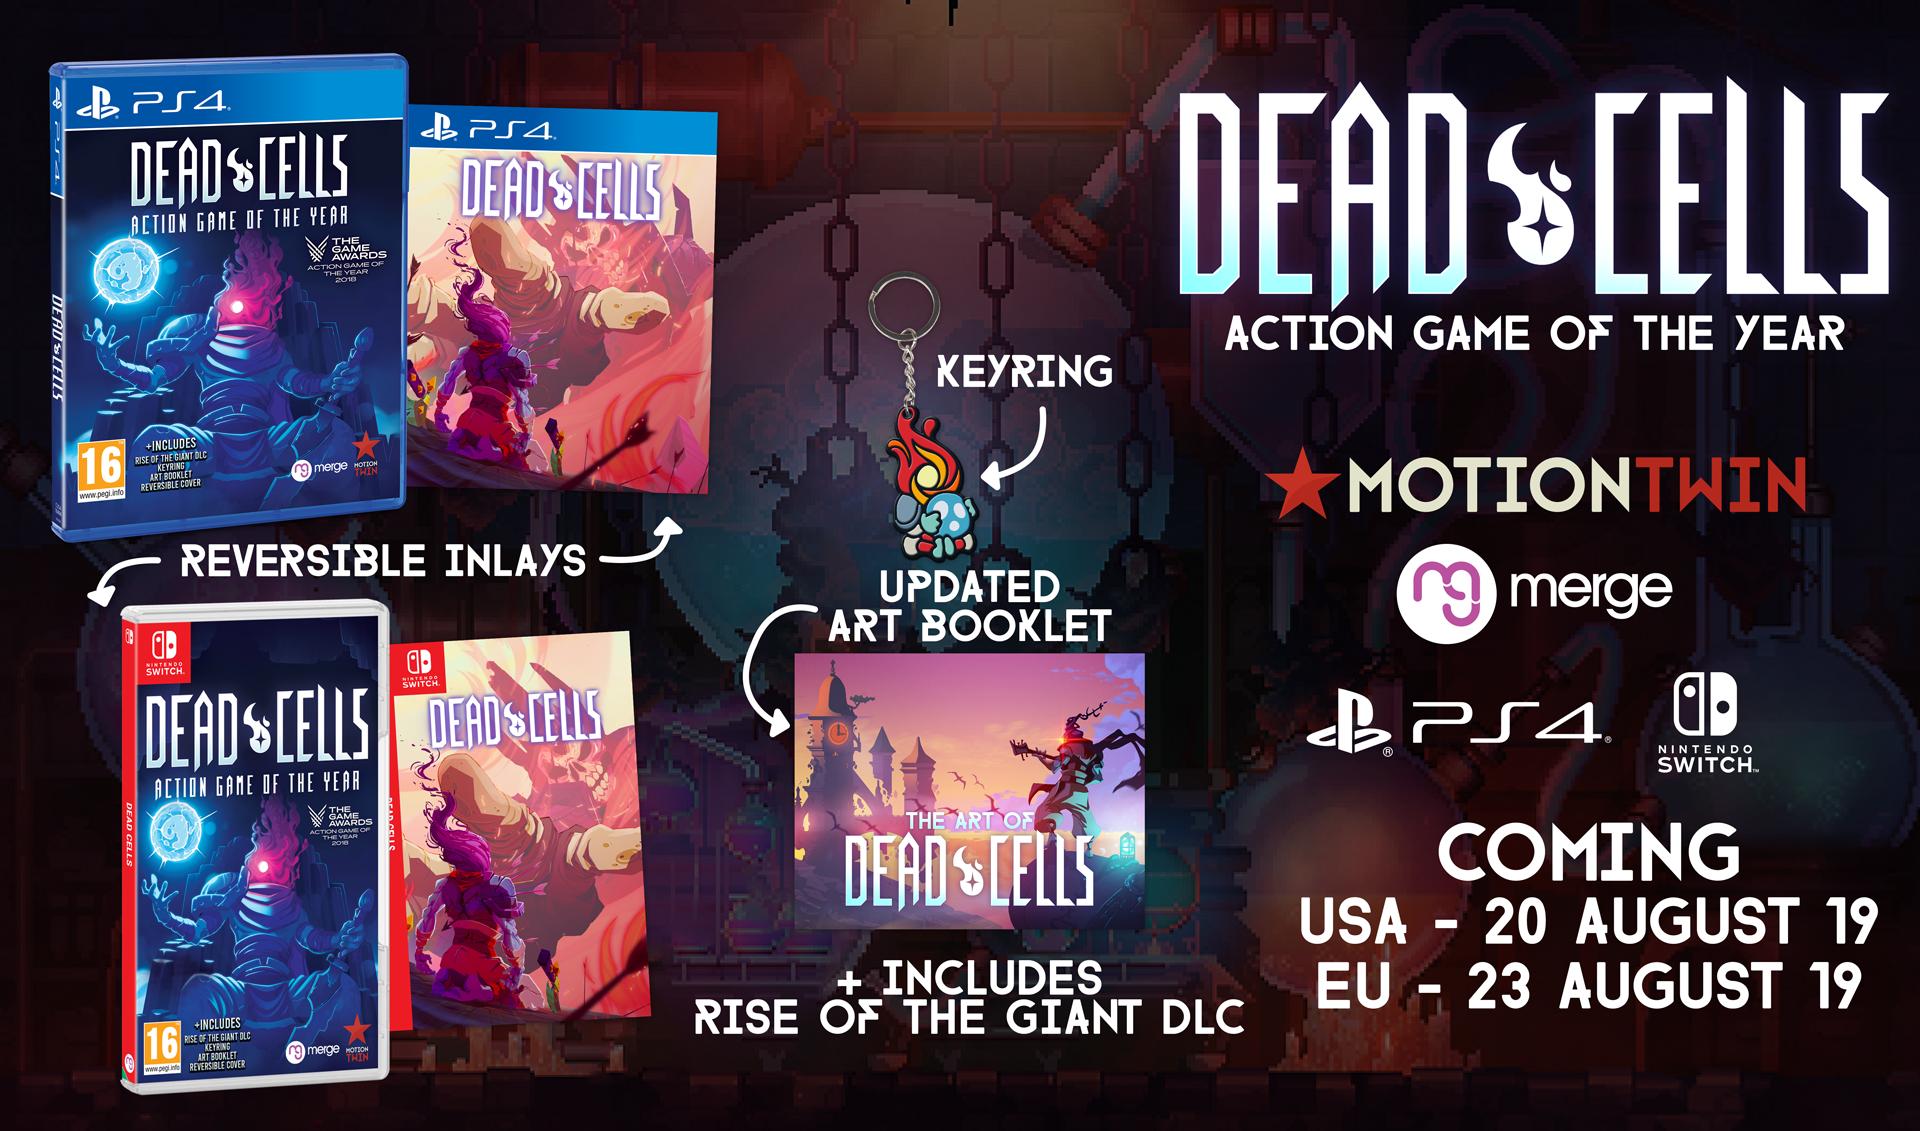 Dead cells : action game of the year